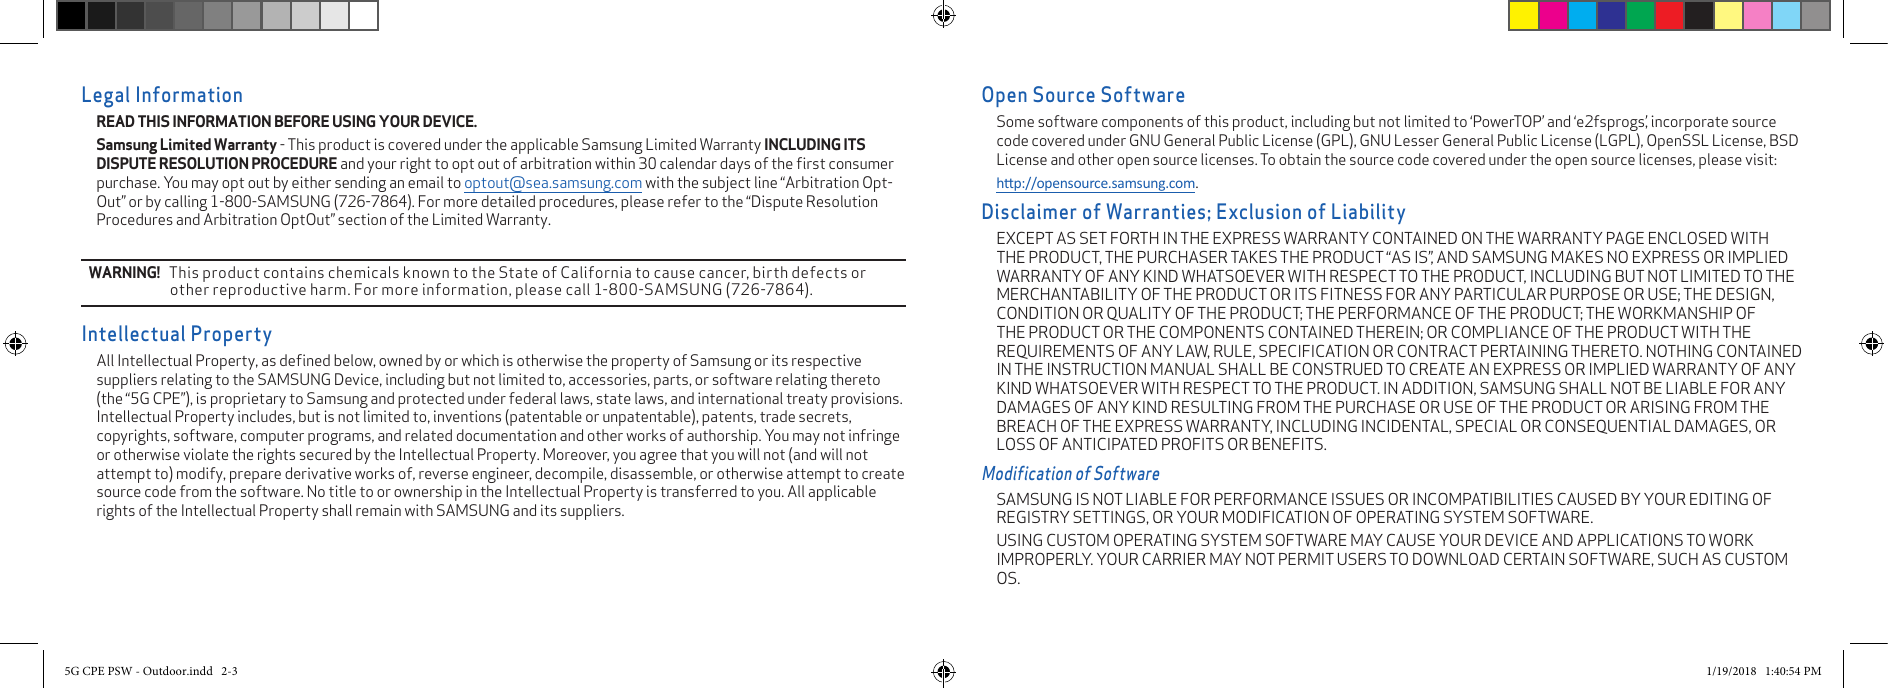 Open Source SoftwareSome software components of this product, including but not limited to ‘PowerTOP’ and ‘e2fsprogs’, incorporate source code covered under GNU General Public License (GPL), GNU Lesser General Public License (LGPL), OpenSSL License, BSD License and other open source licenses. To obtain the source code covered under the open source licenses, please visit:hp://opensource.samsung.com.Disclaimer of Warranties; Exclusion of LiabilityEXCEPT AS SET FORTH IN THE EXPRESS WARRANTY CONTAINED ON THE WARRANTY PAGE ENCLOSED WITH THE PRODUCT, THE PURCHASER TAKES THE PRODUCT “AS IS”, AND SAMSUNG MAKES NO EXPRESS OR IMPLIED WARRANTY OF ANY KIND WHATSOEVER WITH RESPECT TO THE PRODUCT, INCLUDING BUT NOT LIMITED TO THE MERCHANTABILITY OF THE PRODUCT OR ITS FITNESS FOR ANY PARTICULAR PURPOSE OR USE; THE DESIGN, CONDITION OR QUALITY OF THE PRODUCT; THE PERFORMANCE OF THE PRODUCT; THE WORKMANSHIP OF THE PRODUCT OR THE COMPONENTS CONTAINED THEREIN; OR COMPLIANCE OF THE PRODUCT WITH THE REQUIREMENTS OF ANY LAW, RULE, SPECIFICATION OR CONTRACT PERTAINING THERETO. NOTHING CONTAINED IN THE INSTRUCTION MANUAL SHALL BE CONSTRUED TO CREATE AN EXPRESS OR IMPLIED WARRANTY OF ANY KIND WHATSOEVER WITH RESPECT TO THE PRODUCT. IN ADDITION, SAMSUNG SHALL NOT BE LIABLE FOR ANY DAMAGES OF ANY KIND RESULTING FROM THE PURCHASE OR USE OF THE PRODUCT OR ARISING FROM THE BREACH OF THE EXPRESS WARRANTY, INCLUDING INCIDENTAL, SPECIAL OR CONSEQUENTIAL DAMAGES, OR LOSS OF ANTICIPATED PROFITS OR BENEFITS.Modification of SoftwareSAMSUNG IS NOT LIABLE FOR PERFORMANCE ISSUES OR INCOMPATIBILITIES CAUSED BY YOUR EDITING OF REGISTRY SETTINGS, OR YOUR MODIFICATION OF OPERATING SYSTEM SOFTWARE. USING CUSTOM OPERATING SYSTEM SOFTWARE MAY CAUSE YOUR DEVICE AND APPLICATIONS TO WORK IMPROPERLY. YOUR CARRIER MAY NOT PERMIT USERS TO DOWNLOAD CERTAIN SOFTWARE, SUCH AS CUSTOM OS.Legal InformationREAD THIS INFORMATION BEFORE USING YOUR DEVICE. Samsung Limited Warranty - This product is covered under the applicable Samsung Limited Warranty INCLUDING ITS DISPUTE RESOLUTION PROCEDURE and your right to opt out of arbitration within 30 calendar days of the ﬁrst consumer purchase. You may opt out by either sending an email to optout@sea.samsung.com with the subject line “Arbitration Opt-Out” or by calling 1-800-SAMSUNG (726-7864). For more detailed procedures, please refer to the “Dispute Resolution Procedures and Arbitration OptOut” section of the Limited Warranty.WARNING!   This product contains chemicals known to the State of California to cause cancer, birth defects or other reproductive harm. For more information, please call 1-800-SAMSUNG (726-7864).Intellectual PropertyAll Intellectual Property, as deﬁned below, owned by or which is otherwise the property of Samsung or its respective suppliers relating to the SAMSUNG Device, including but not limited to, accessories, parts, or software relating thereto (the “5G CPE”), is proprietary to Samsung and protected under federal laws, state laws, and international treaty provisions. Intellectual Property includes, but is not limited to, inventions (patentable or unpatentable), patents, trade secrets, copyrights, software, computer programs, and related documentation and other works of authorship. You may not infringe or otherwise violate the rights secured by the Intellectual Property. Moreover, you agree that you will not (and will not attempt to) modify, prepare derivative works of, reverse engineer, decompile, disassemble, or otherwise attempt to create source code from the software. No title to or ownership in the Intellectual Property is transferred to you. All applicable rights of the Intellectual Property shall remain with SAMSUNG and its suppliers.5G CPE PSW - Outdoor.indd   2-3 1/19/2018   1:40:54 PM